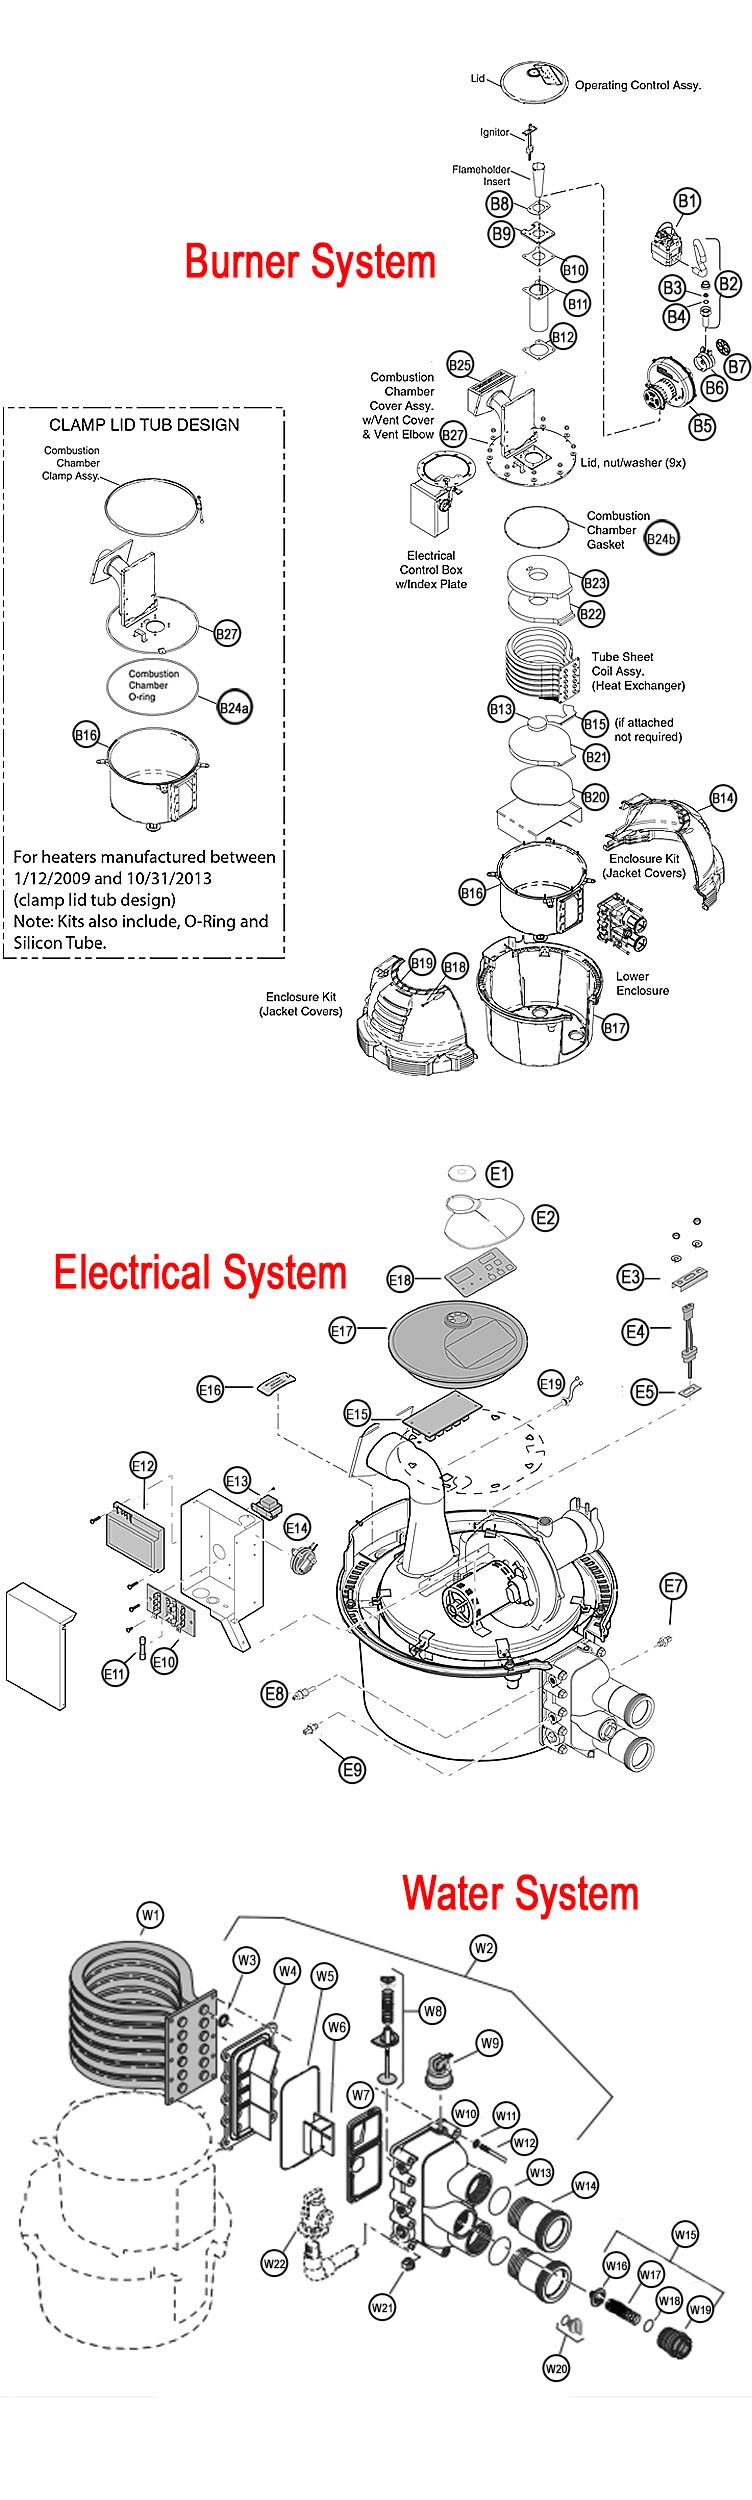 Sta-Rite Max-E-Therm Low NOx Commercial Swimming Pool Heater - Electronic Ignition - Natural Gas - 400,000 BTU ASME - 460763 Parts Schematic